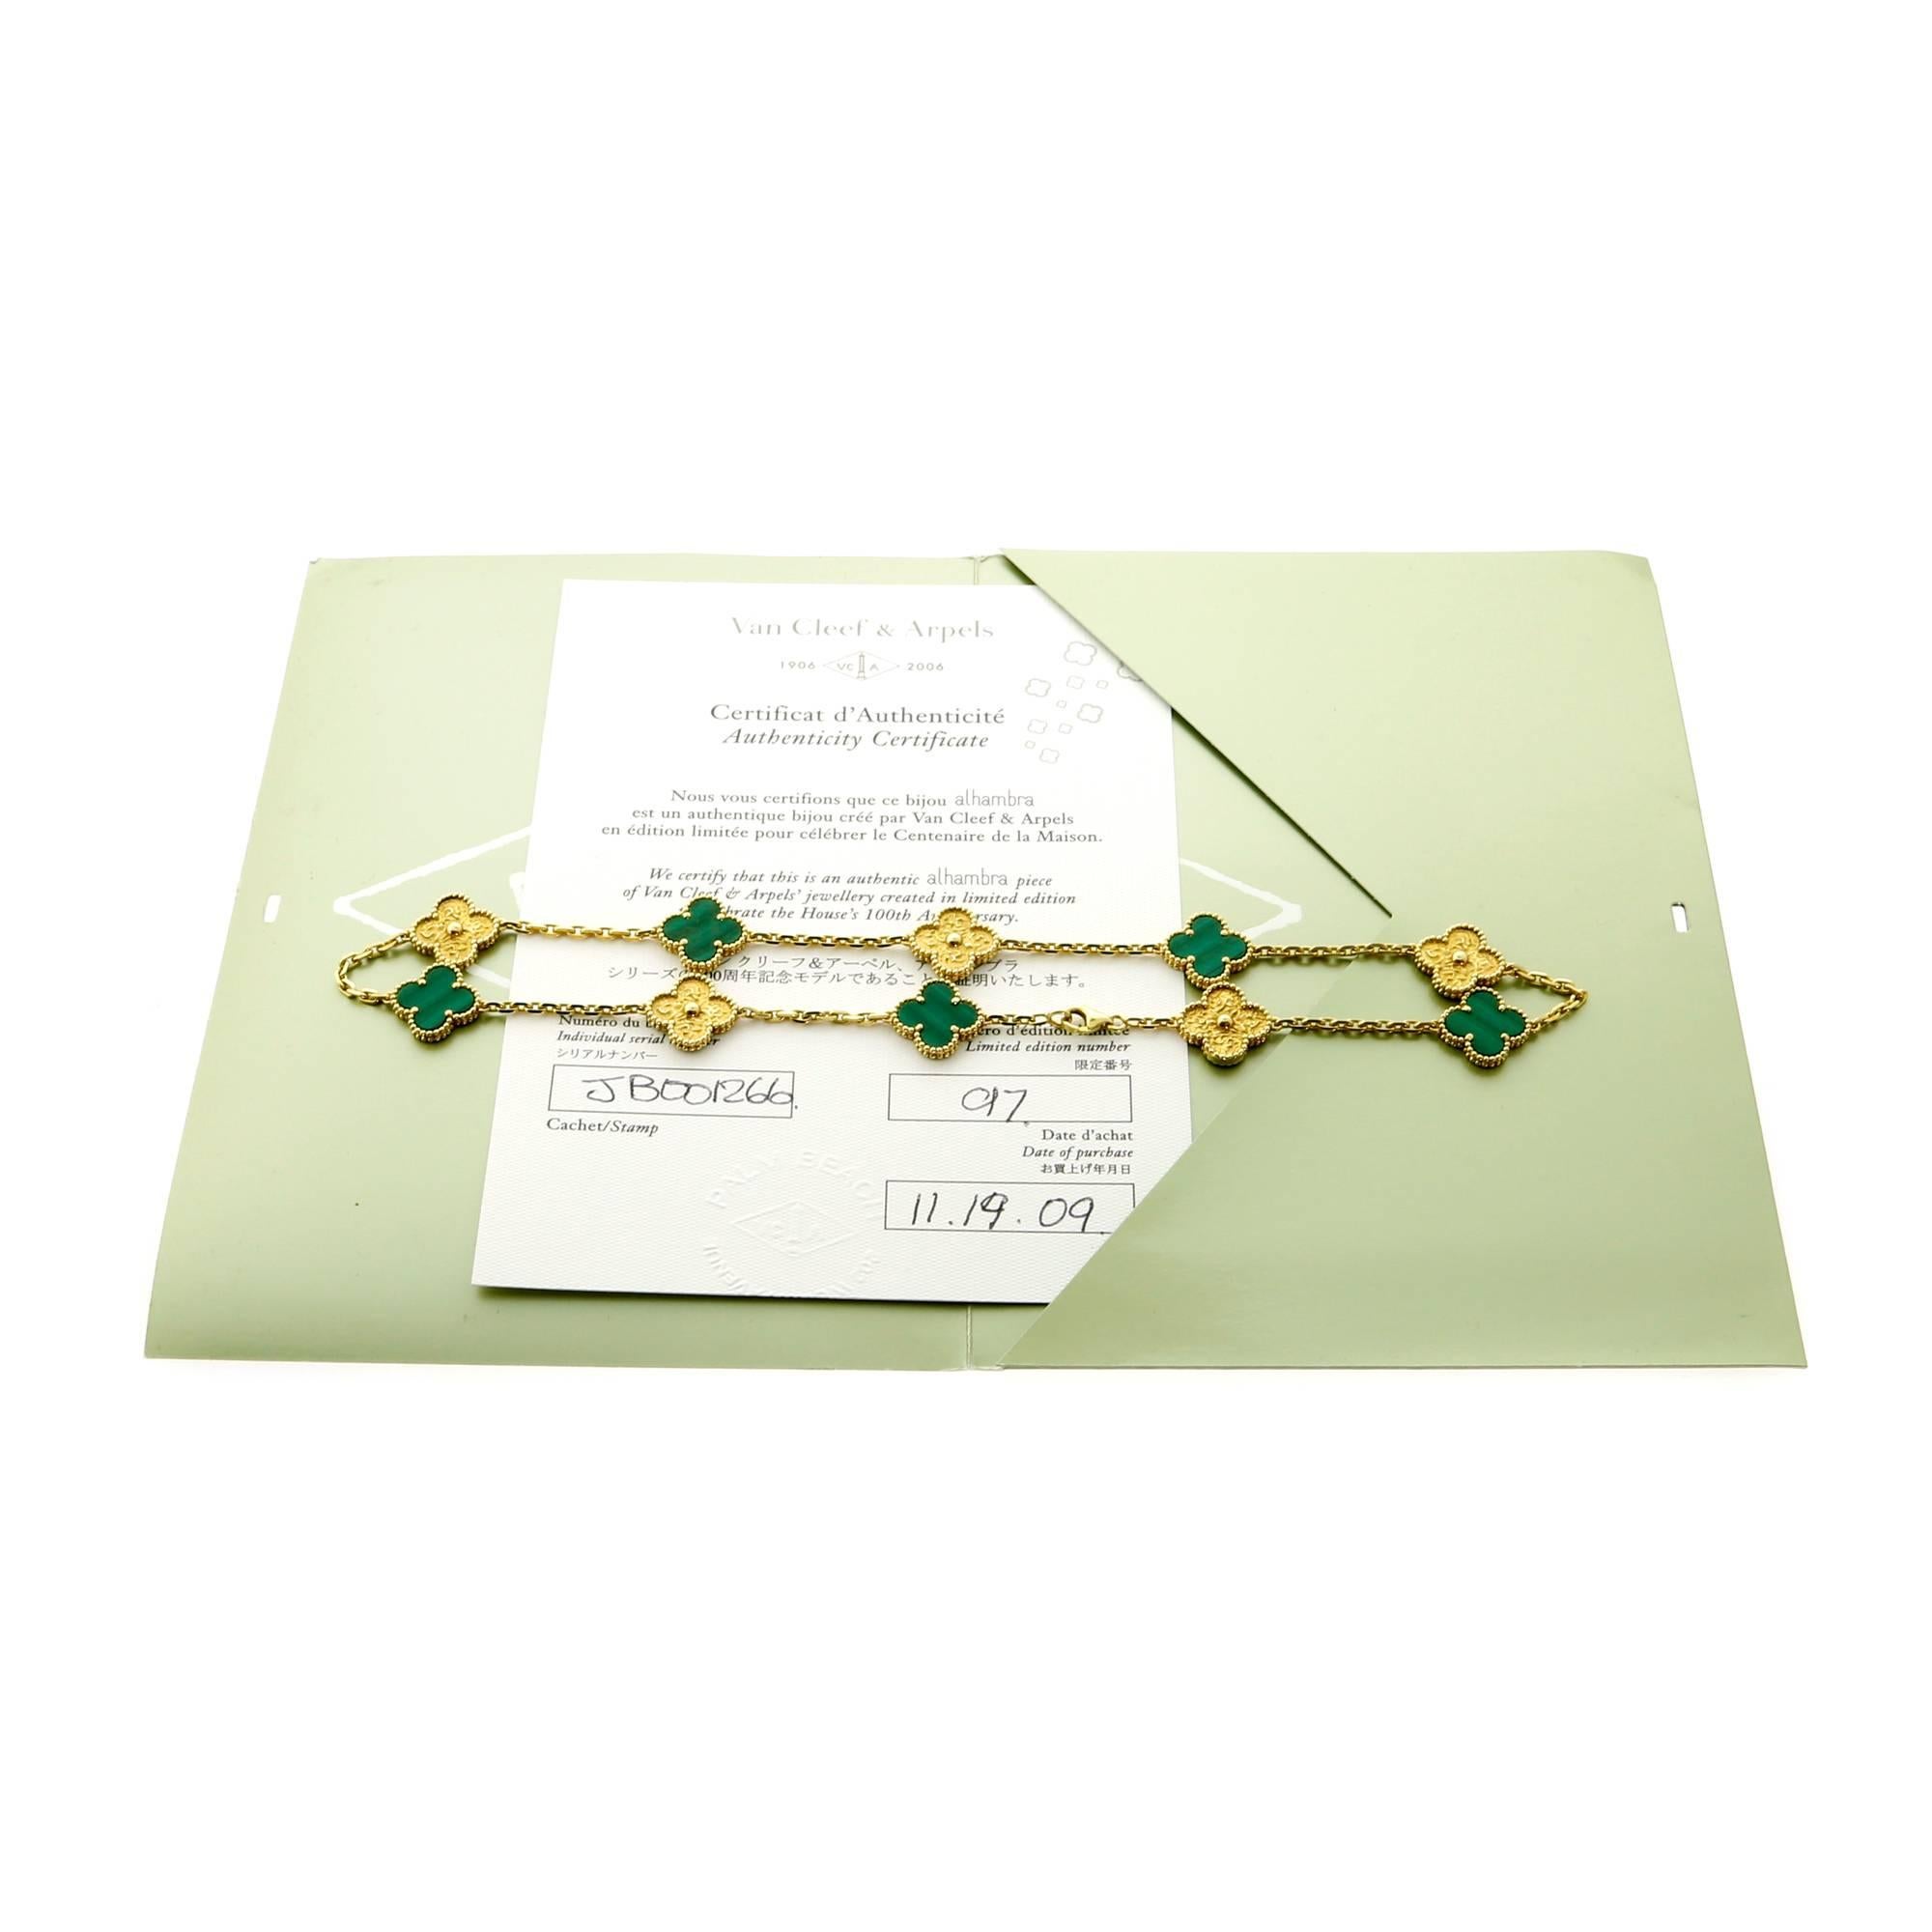 A special release by Van Cleef Arpels and limited to only 100 pcs this magnificent Malachite necklace is crafted in 18k yellow gold and perfect for any VCA collector. Accompanied by Van Cleef Arpels documents.

The necklace measures 16